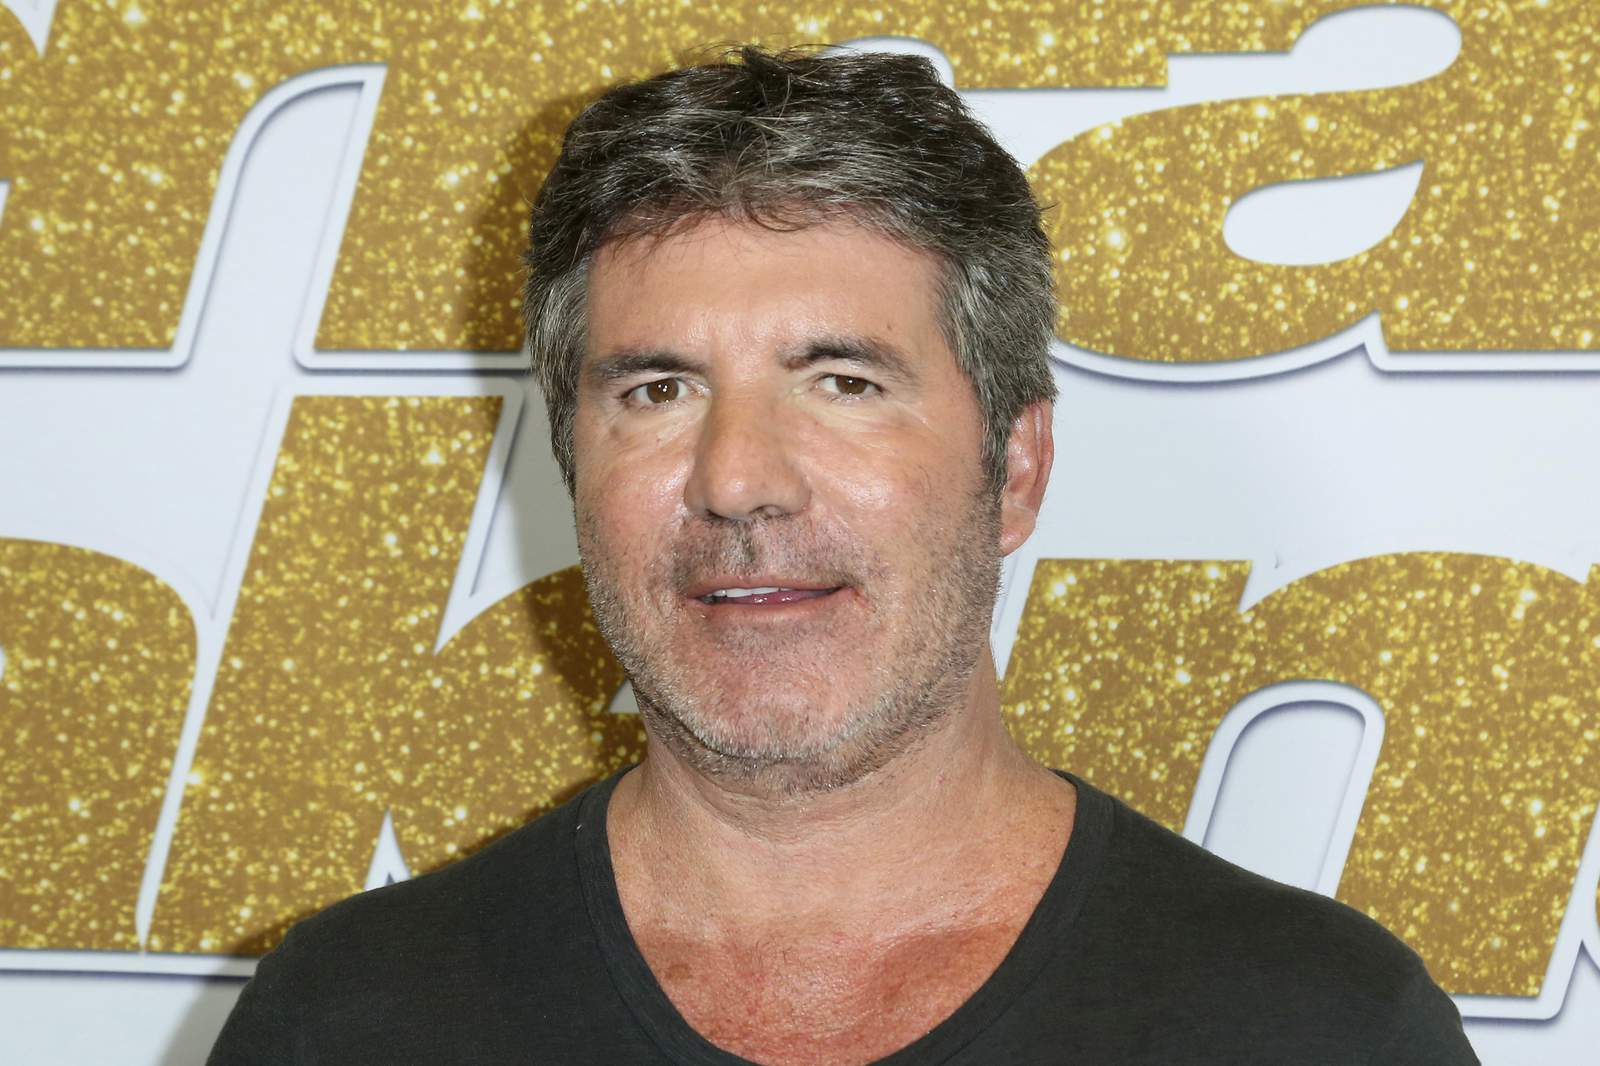 Simon Cowell injures back while testing electric bicycle